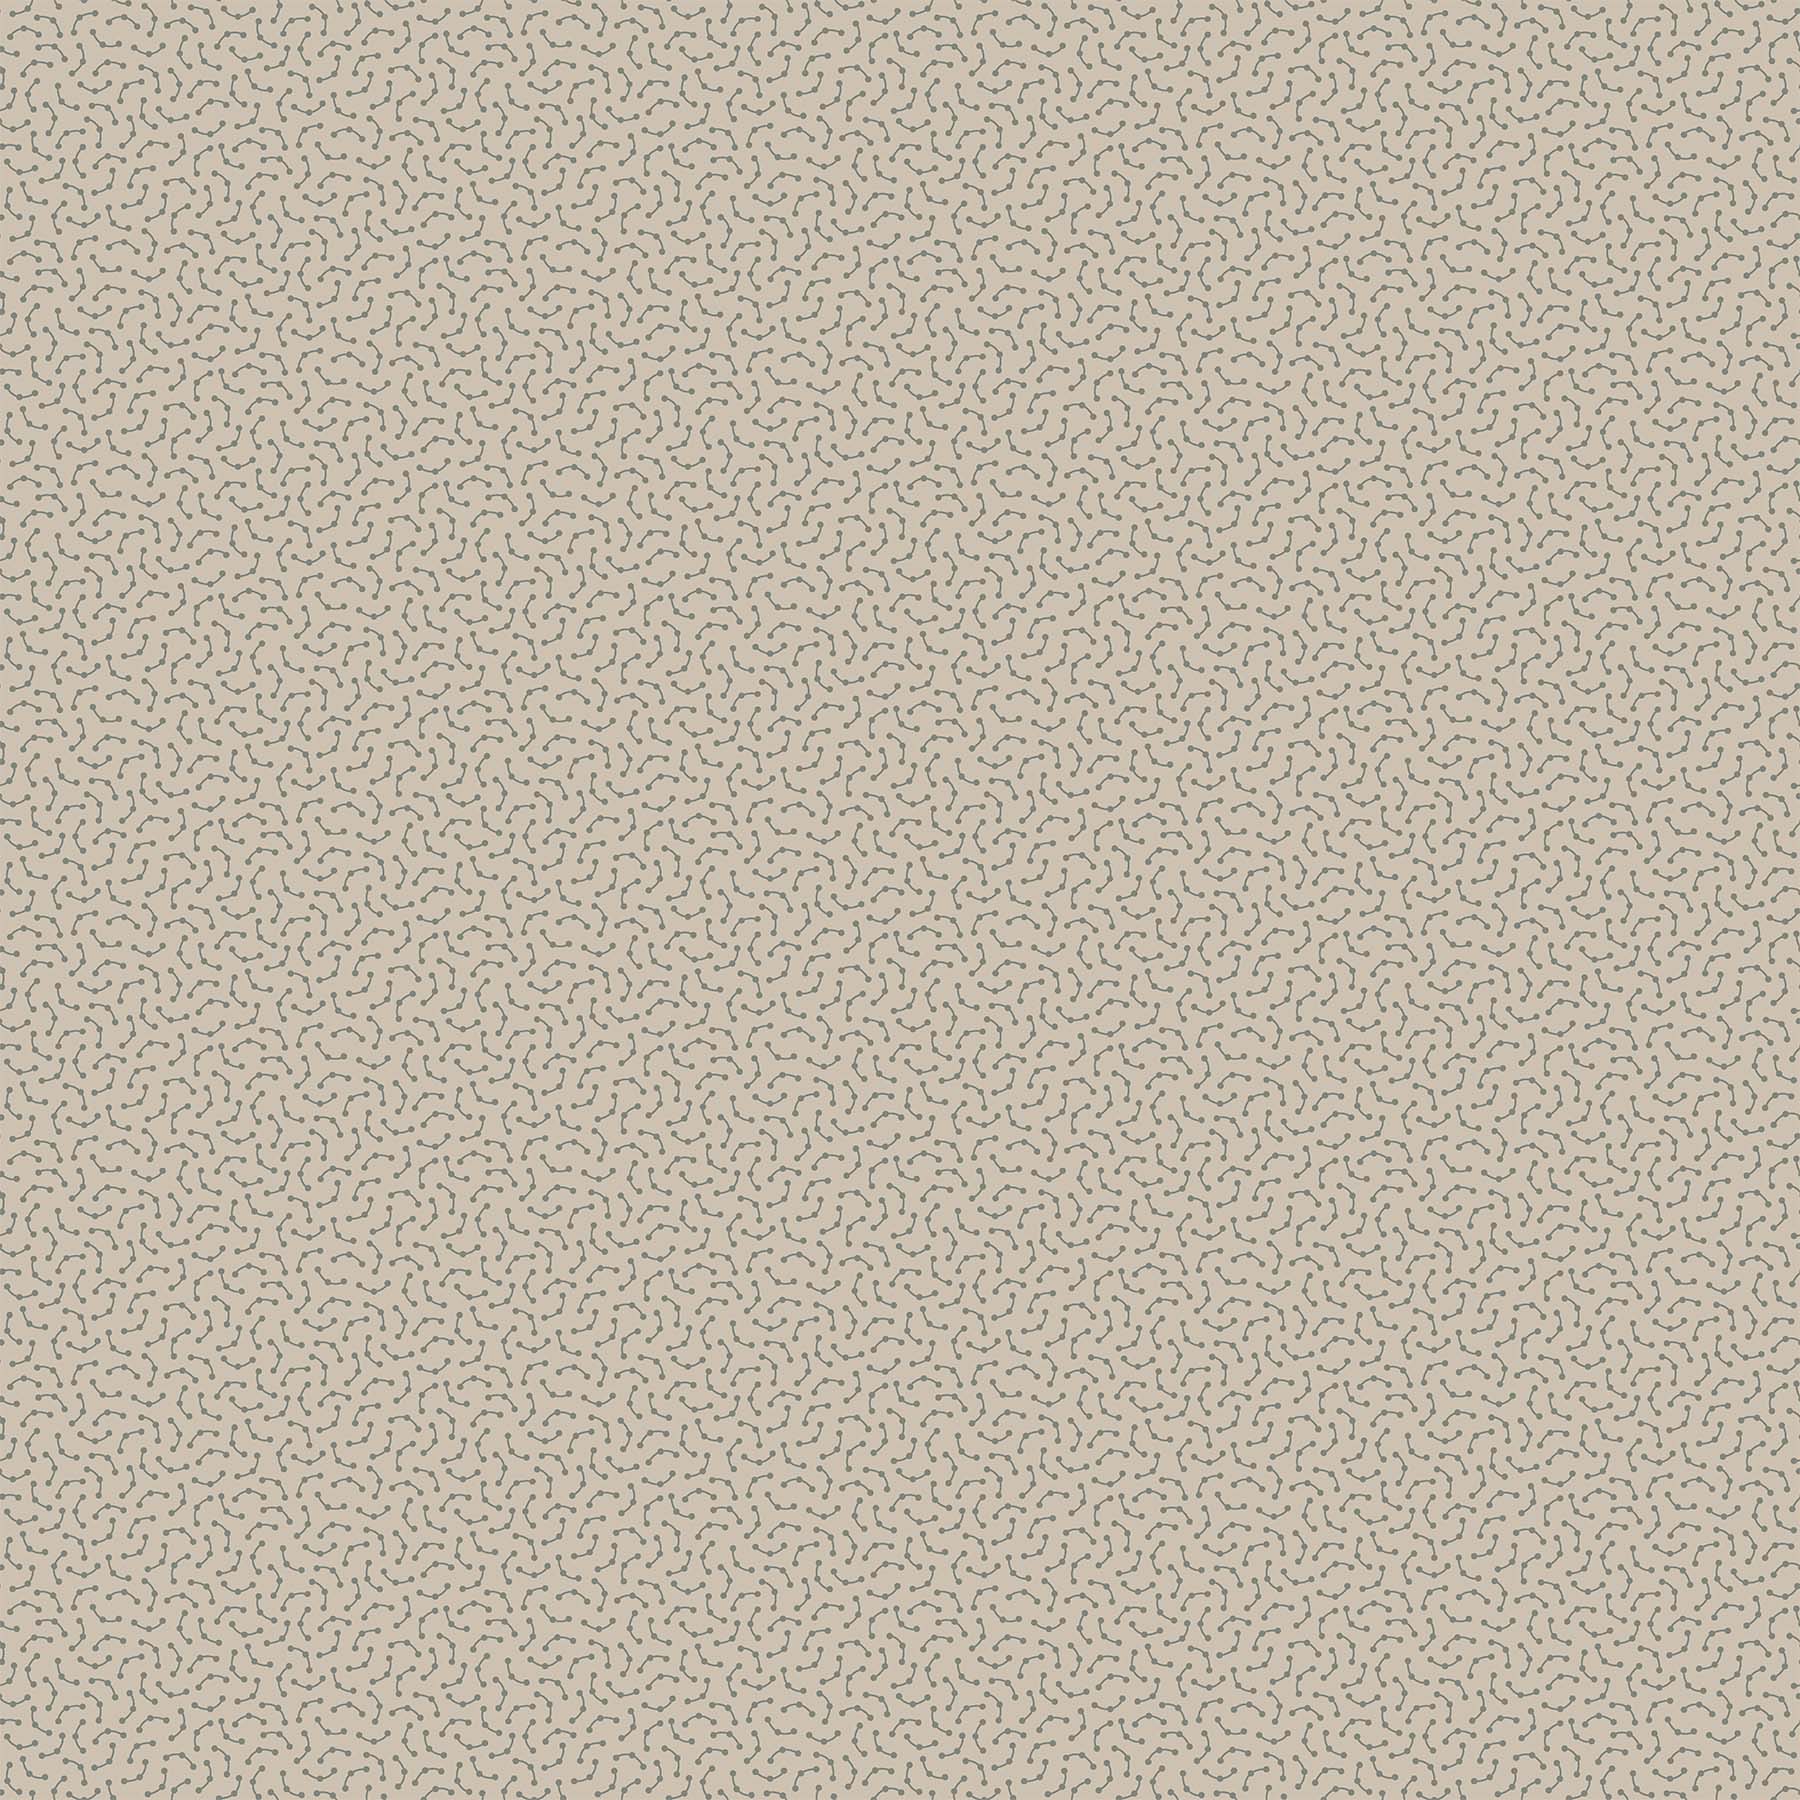 Neutrality Quilt Fabric - Dotted Arcs in Putty - 10289-35